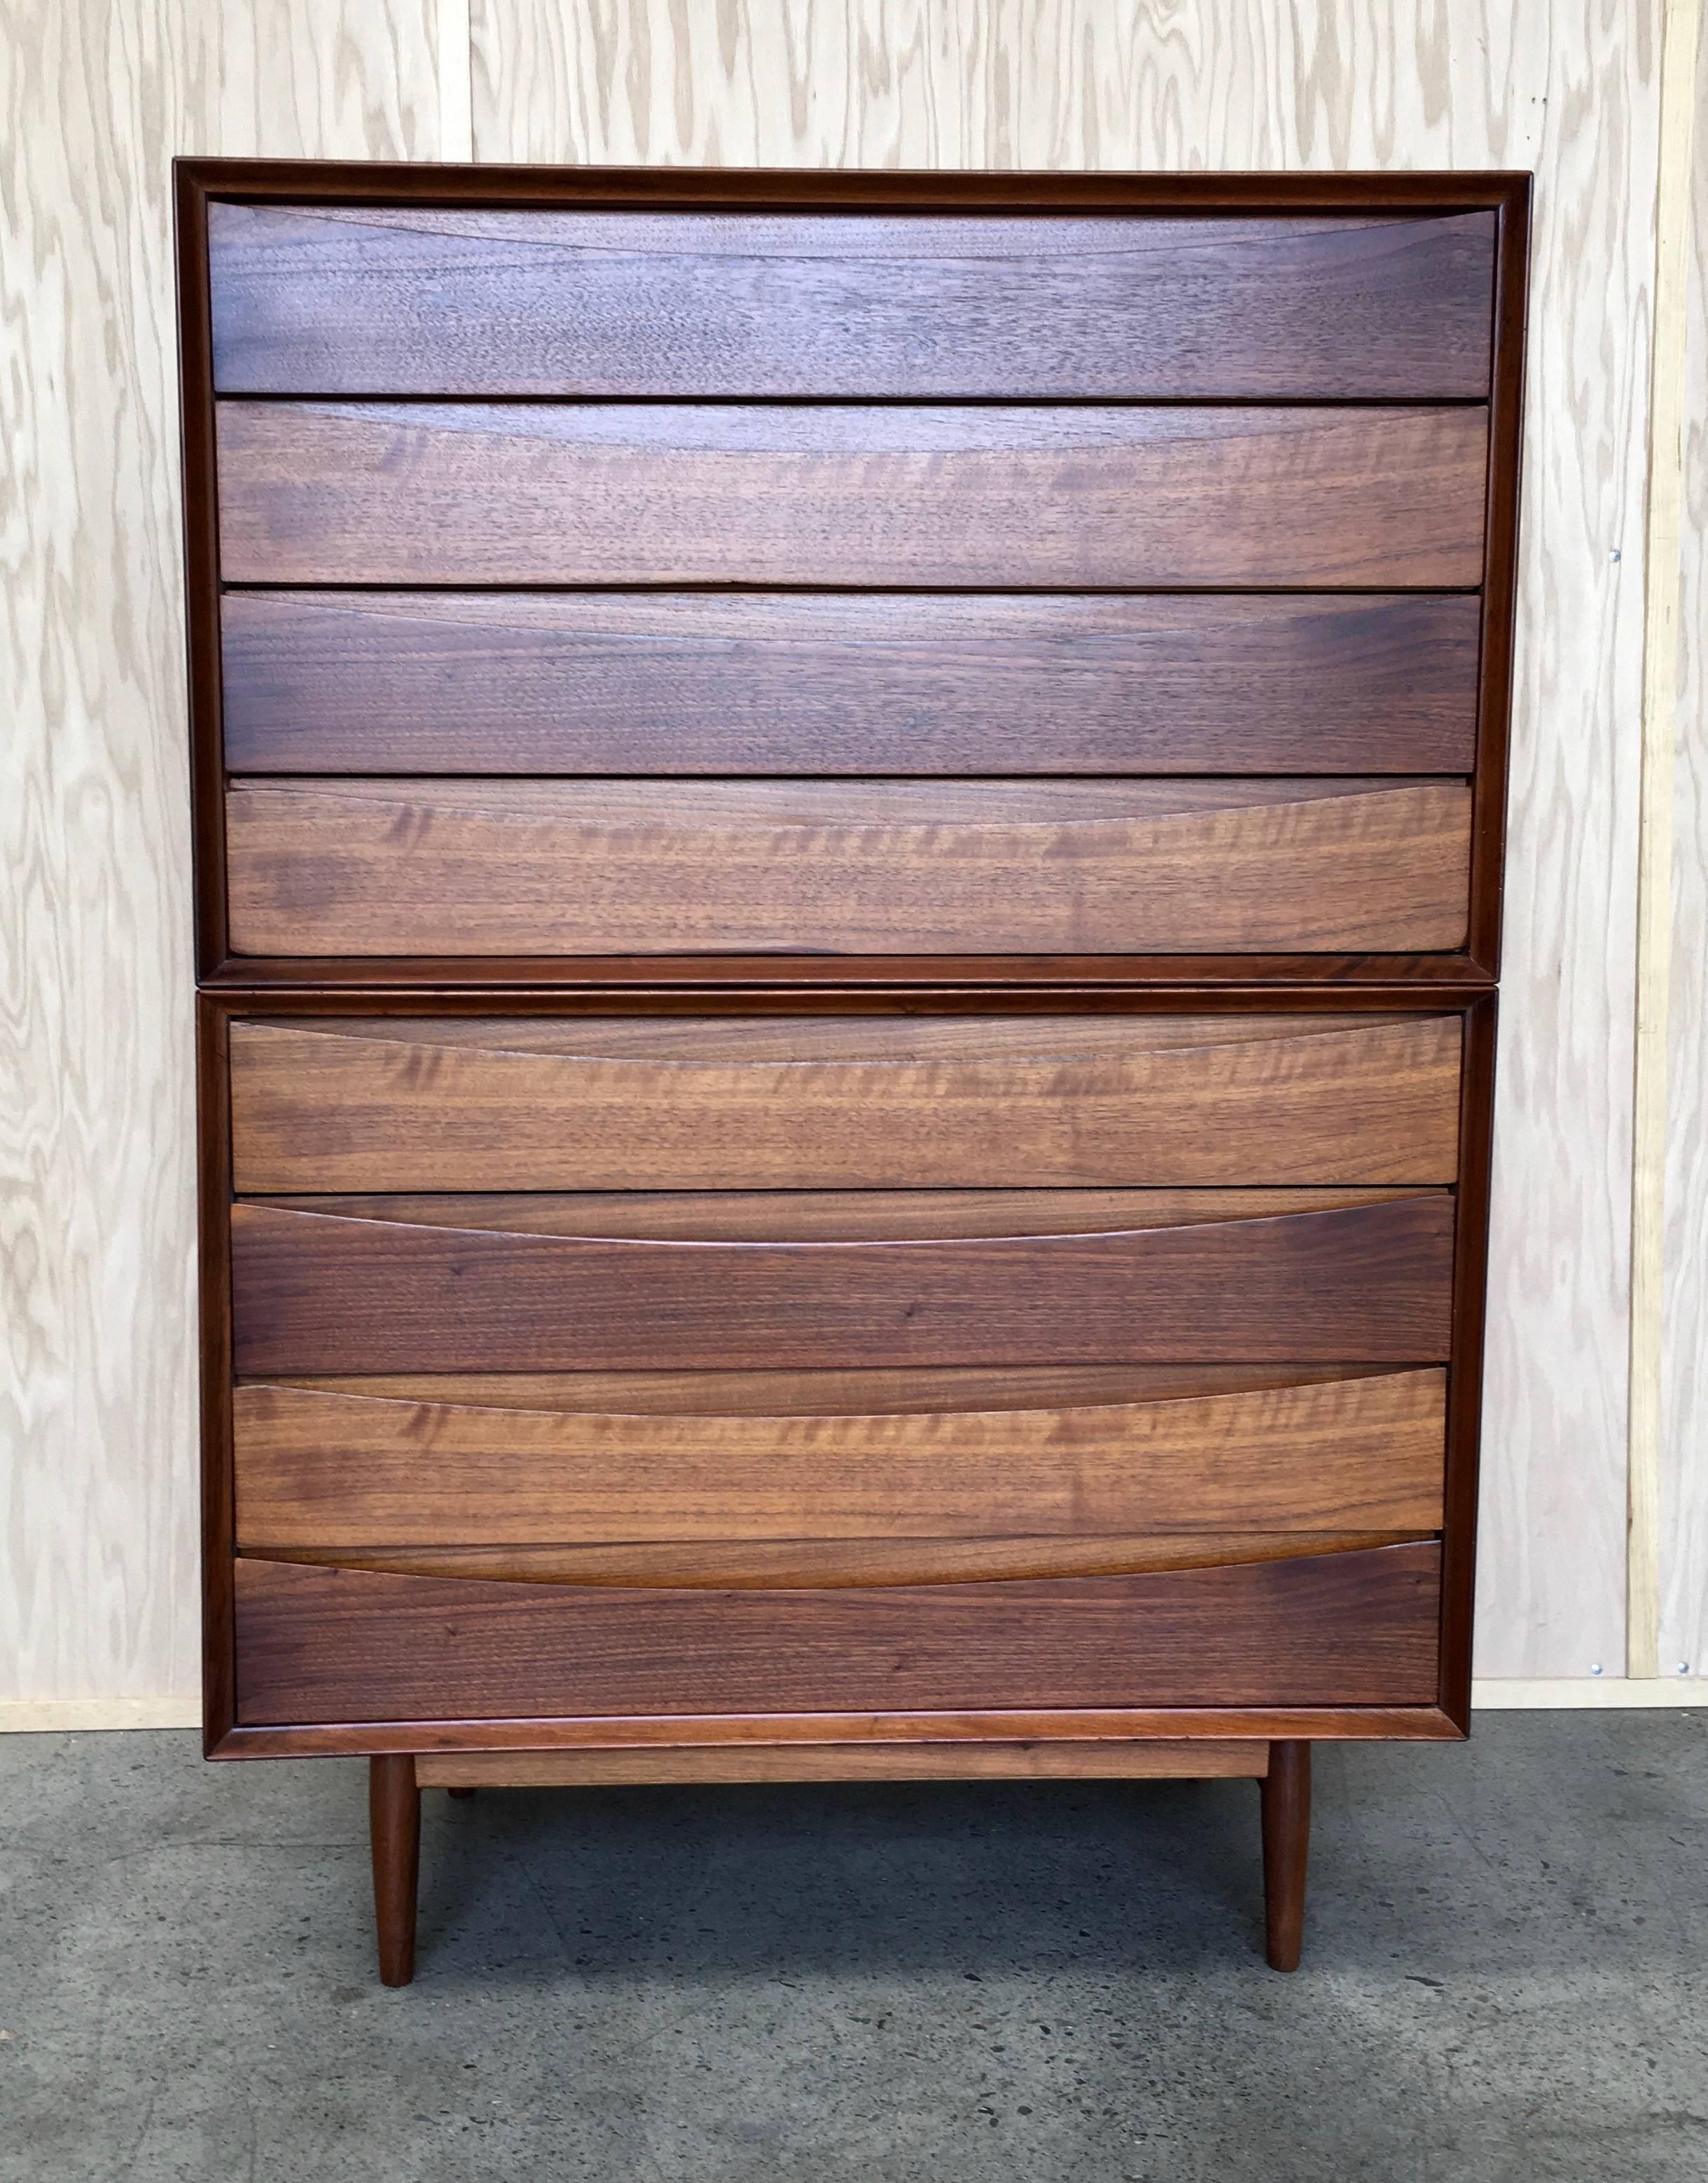 Danish Modern stacked chest on chest by Arne Vodder
This is two cabinets that make one high boy dresser.